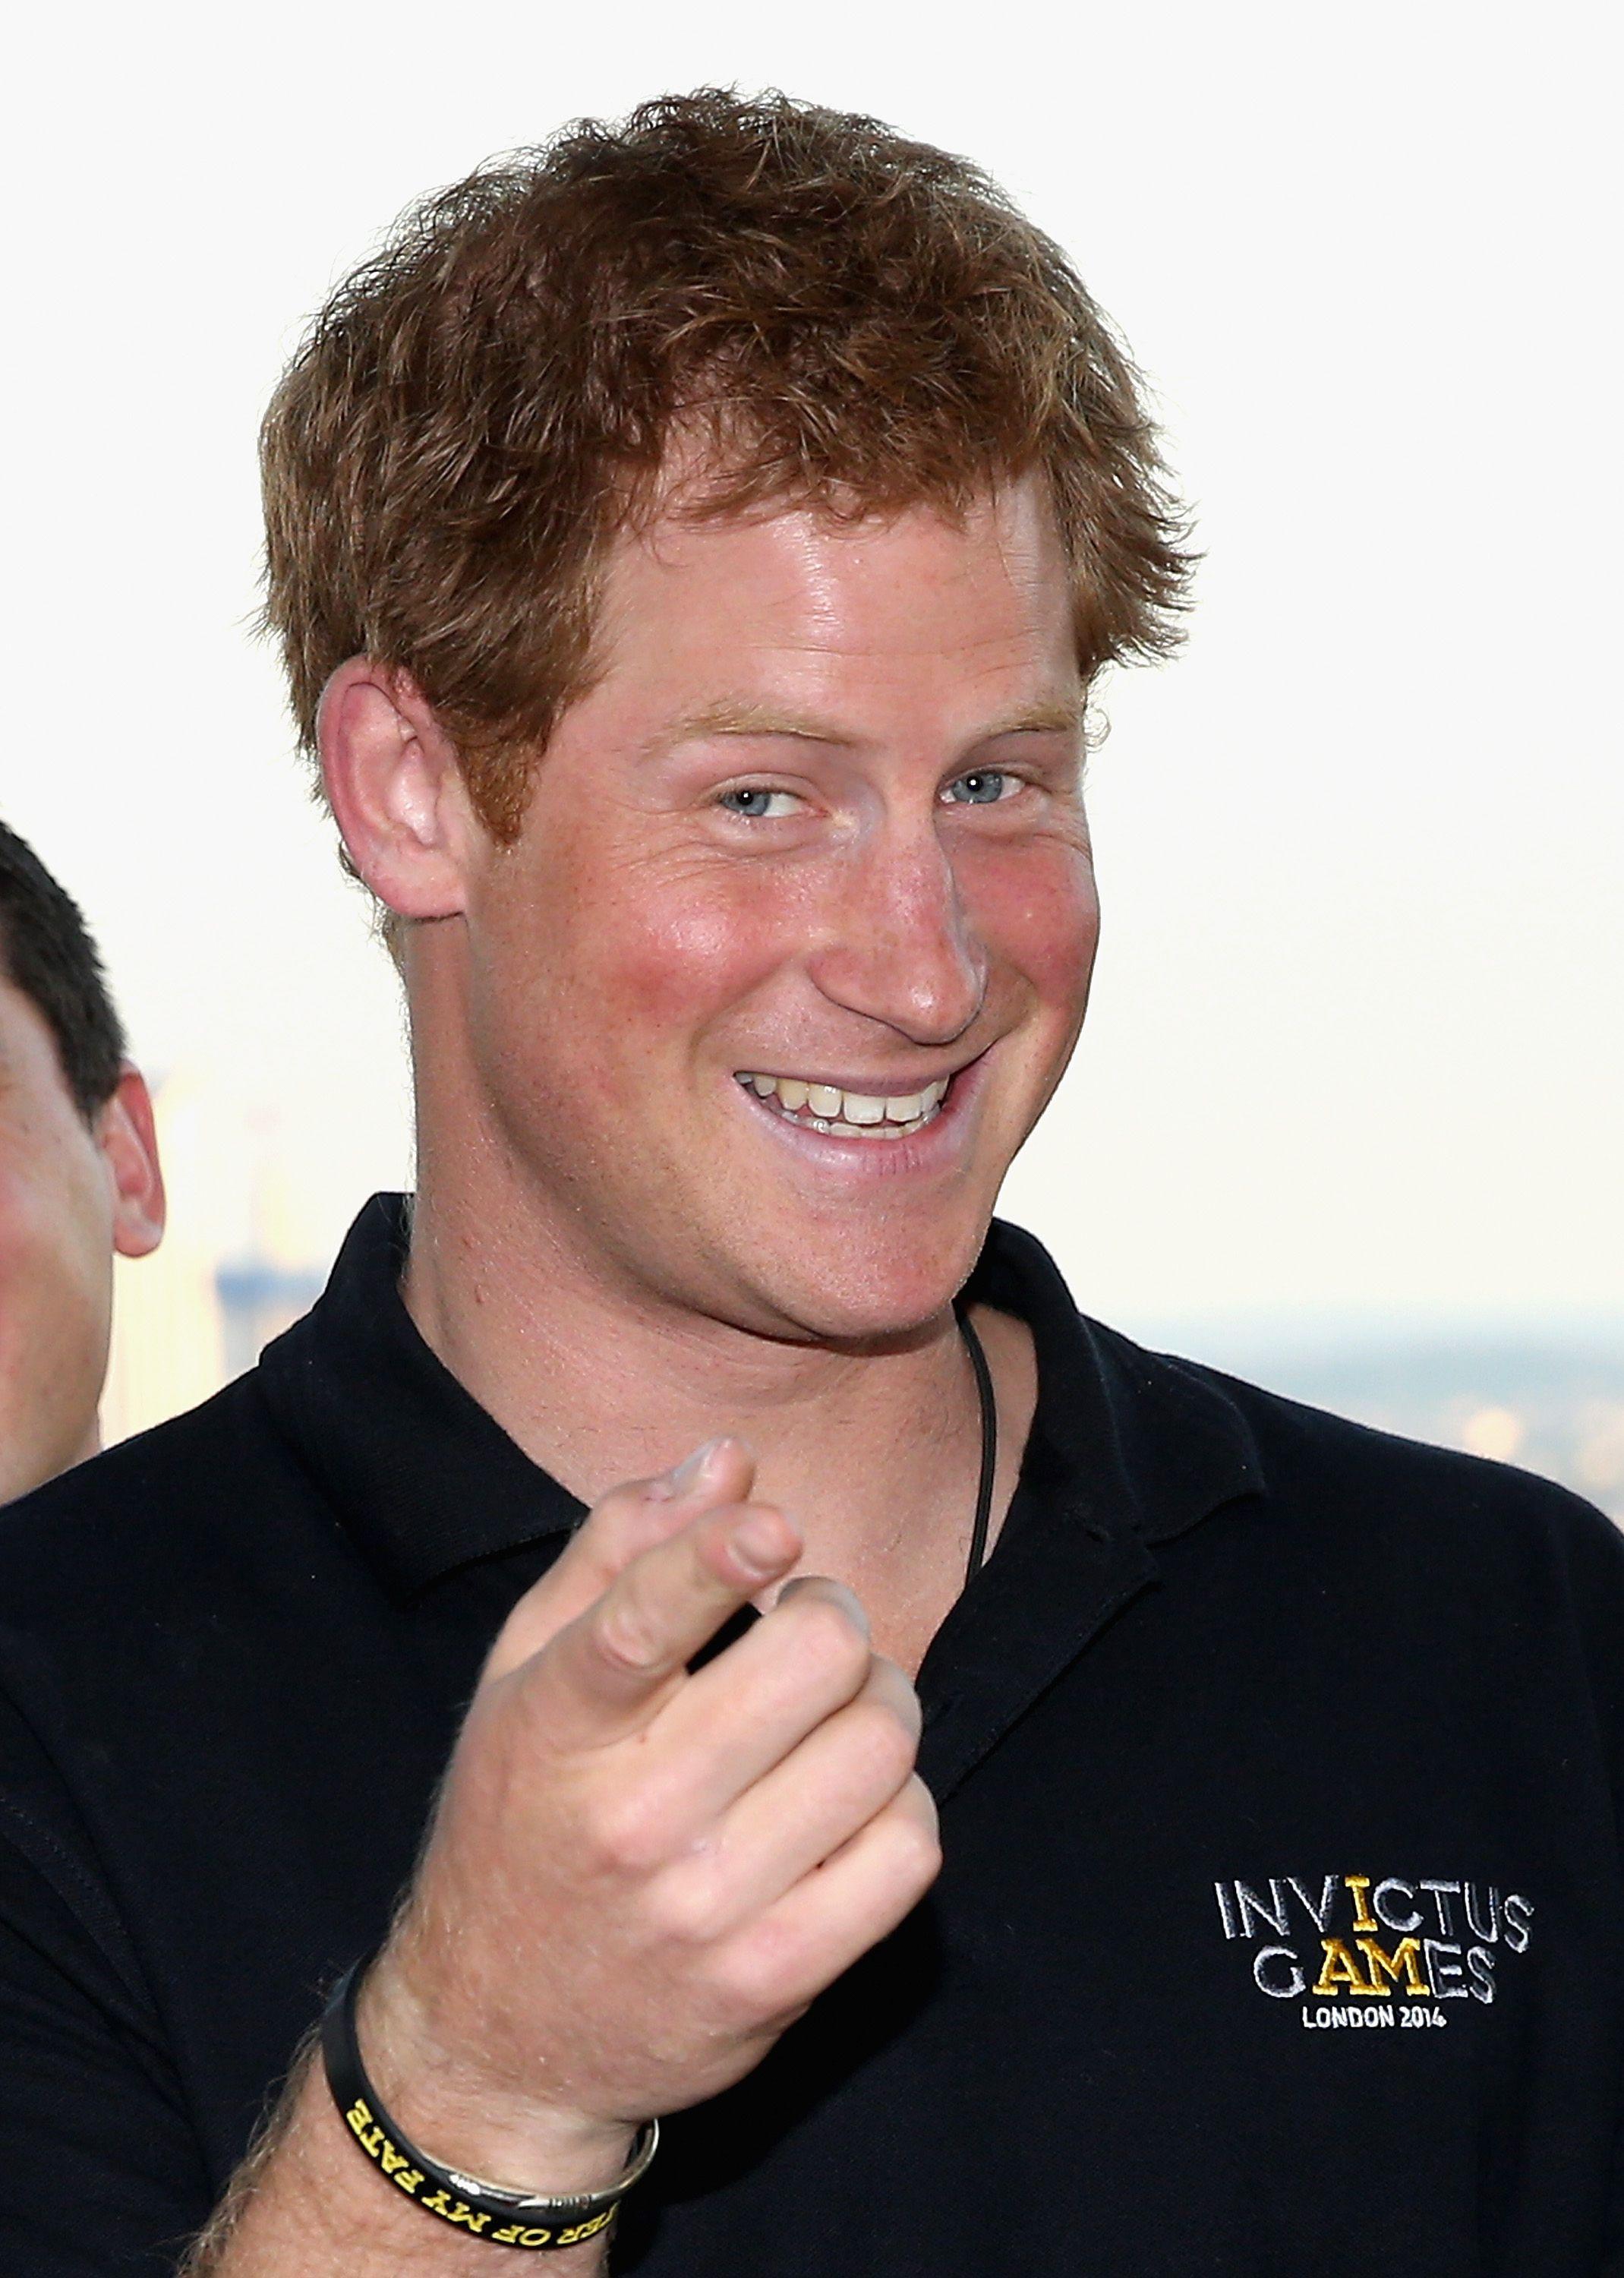 Prince Harry Wallpaper High Quality